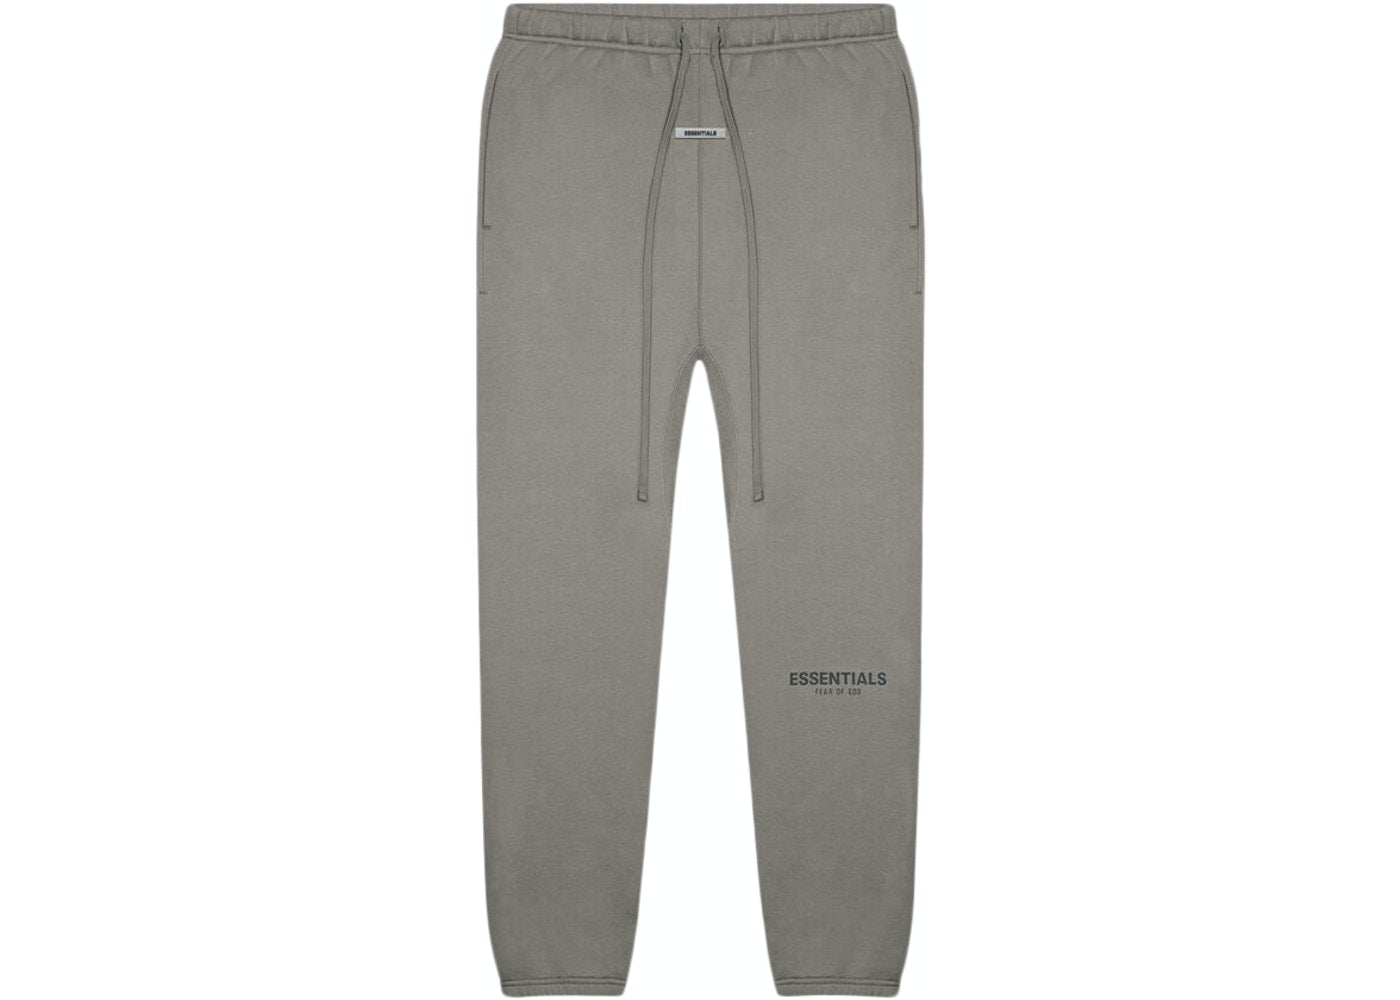 FEAR-OF-GOD-ESSENTIALS-Sweatpants-SS20-Gray-Flannel-Charcoal